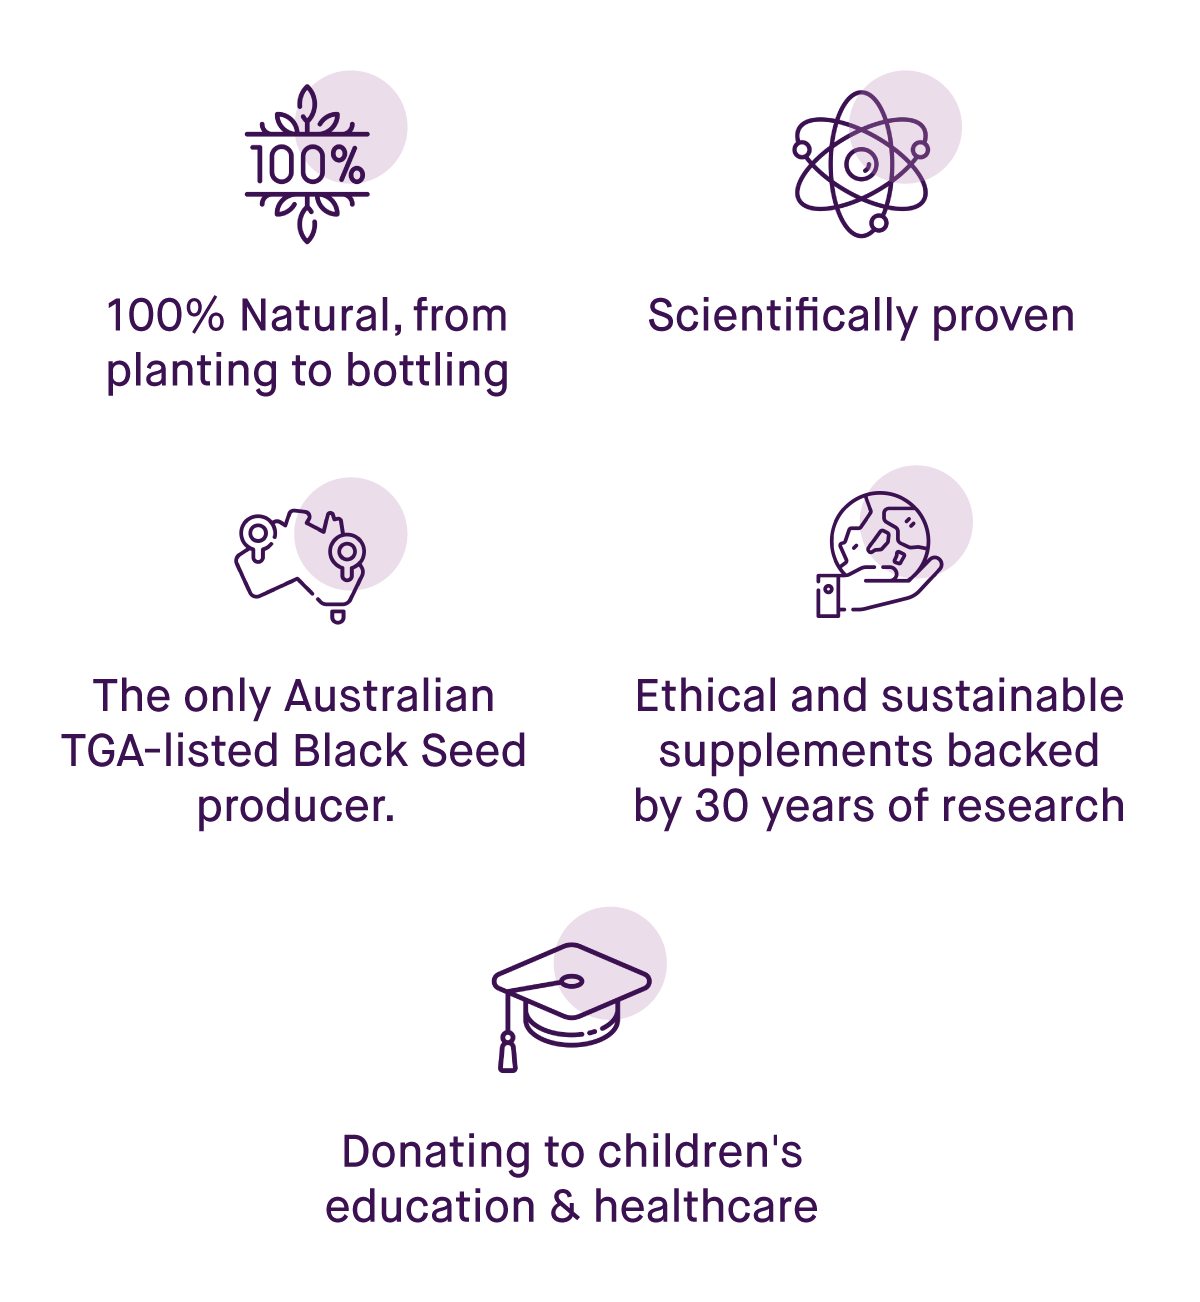 SQZL 100% 100% Natural, from planting to bottling Y The only Australian TGA-listed Black Seed producer. Scientifically proven 0 Ethical and sustainable supplements backed by 30 years of research Donating to children's education healthcare 